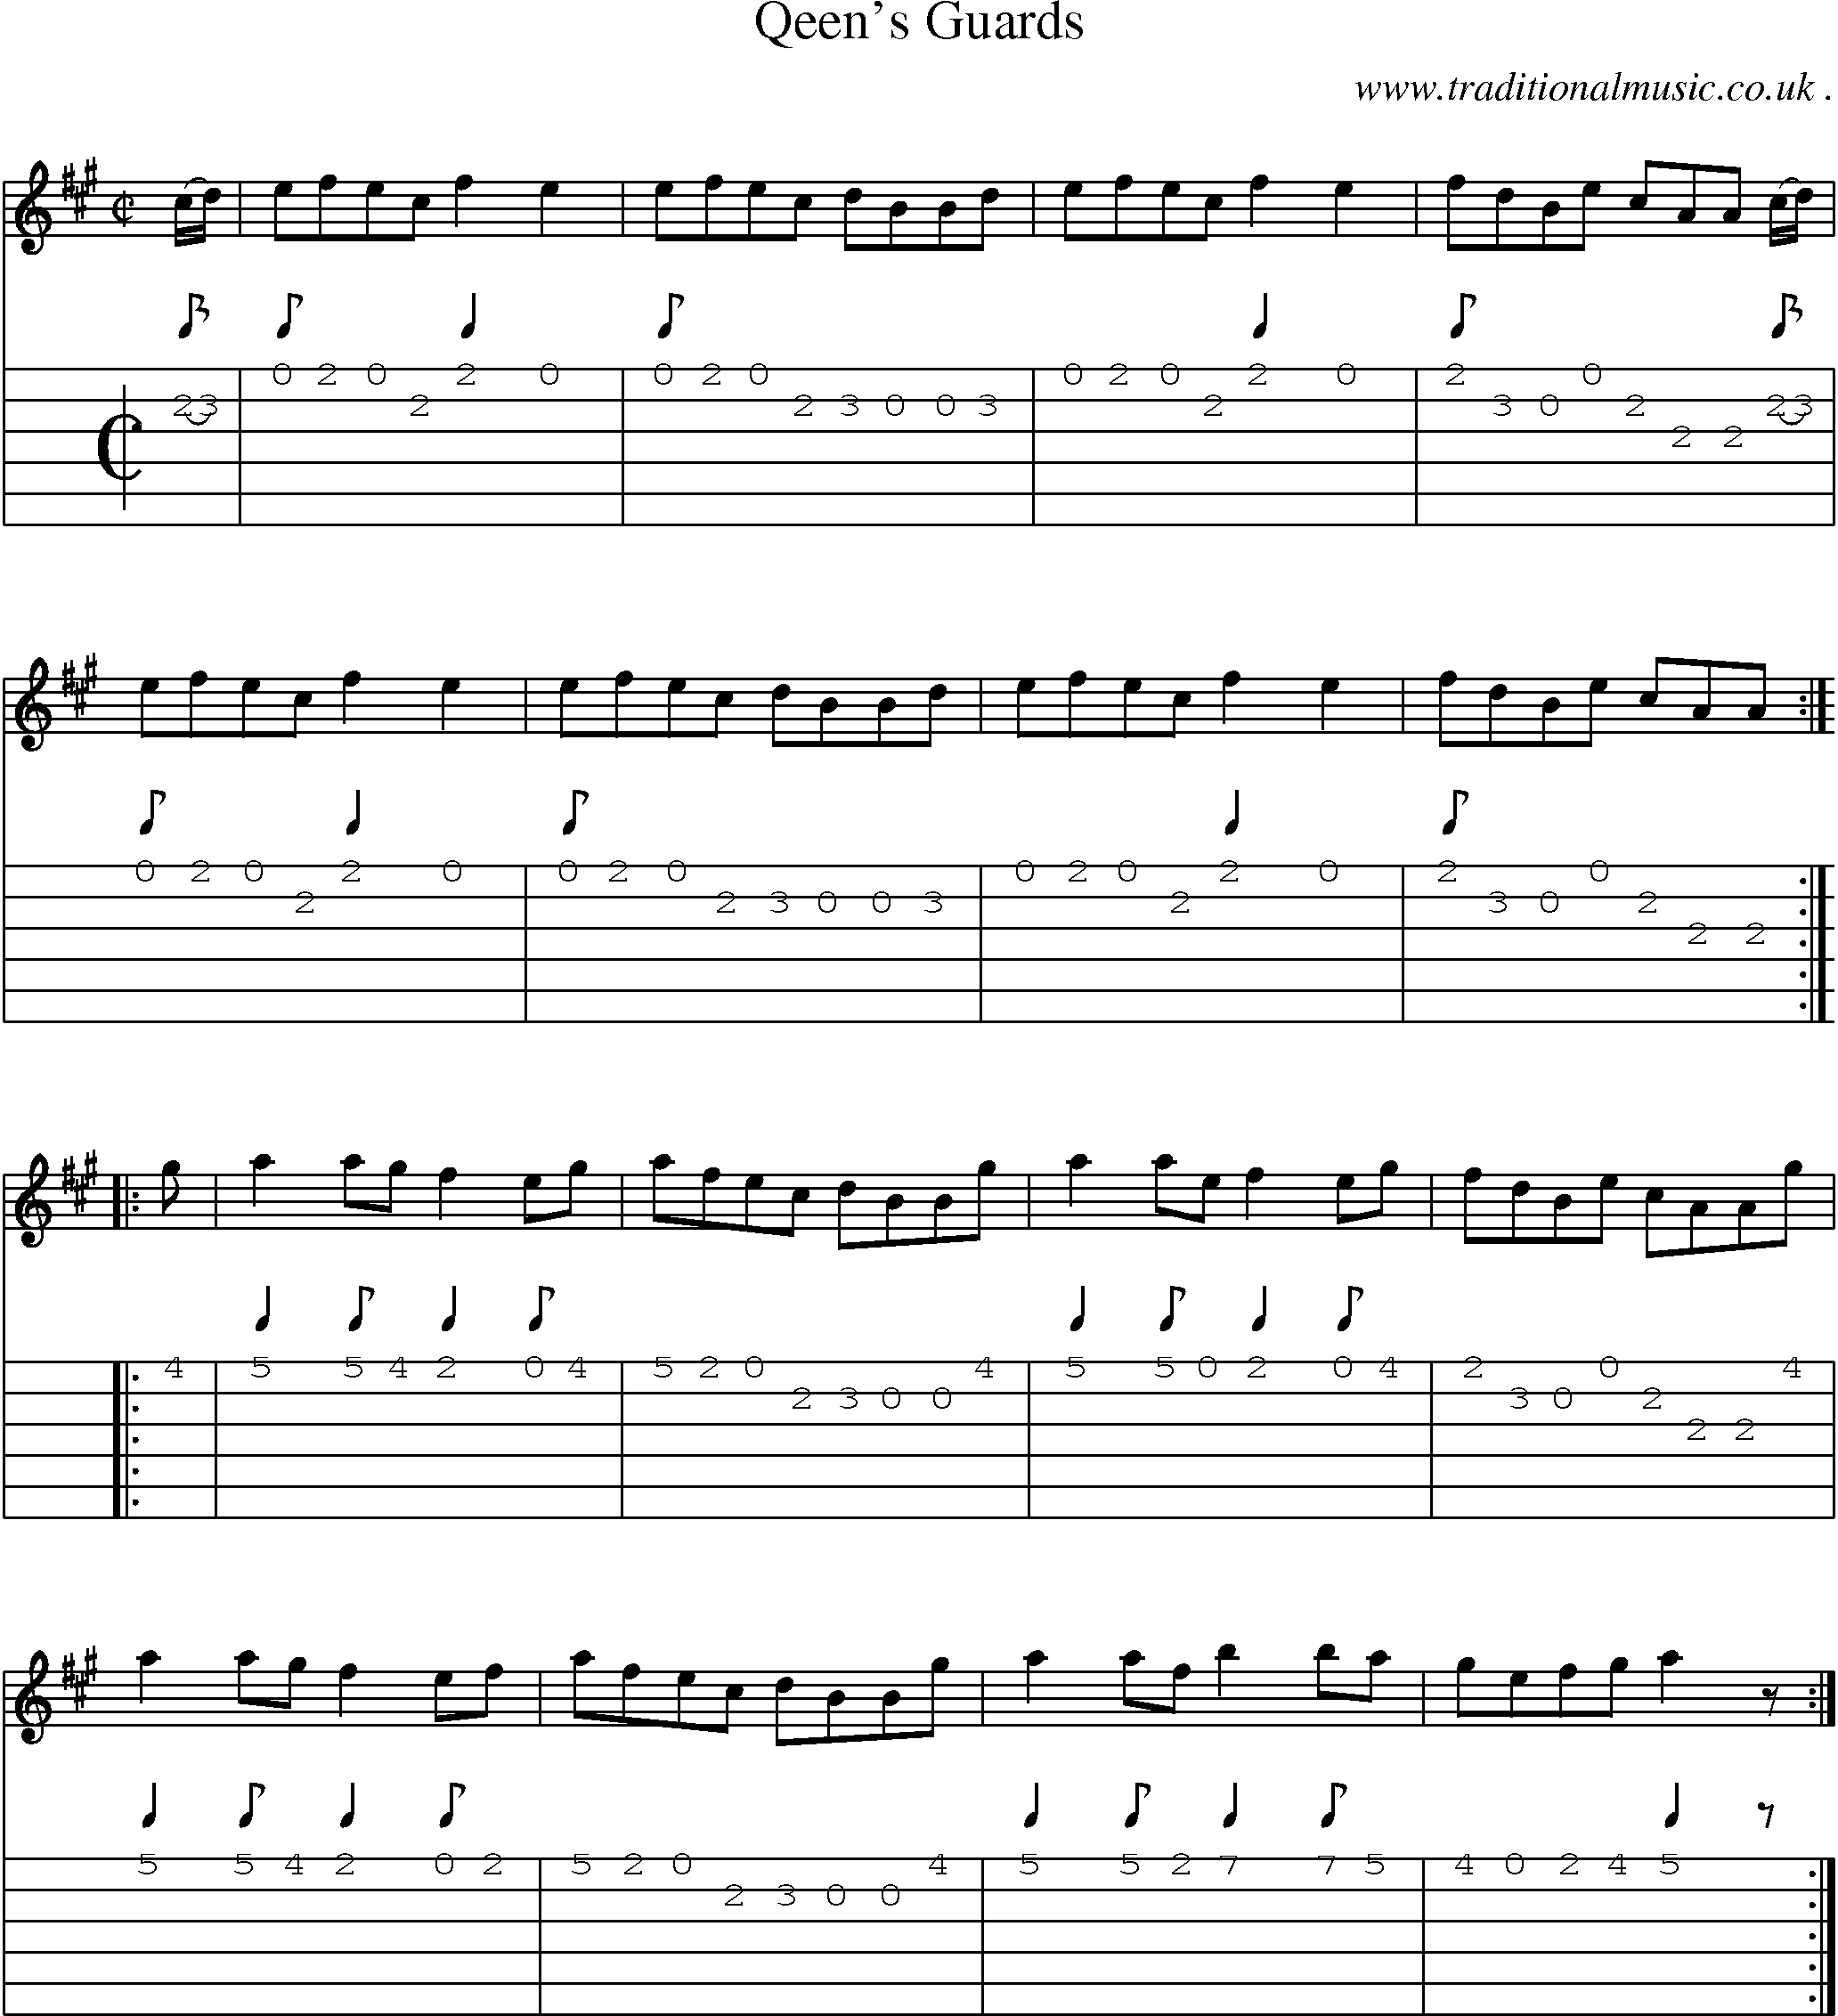 Sheet-Music and Guitar Tabs for Qeens Guards